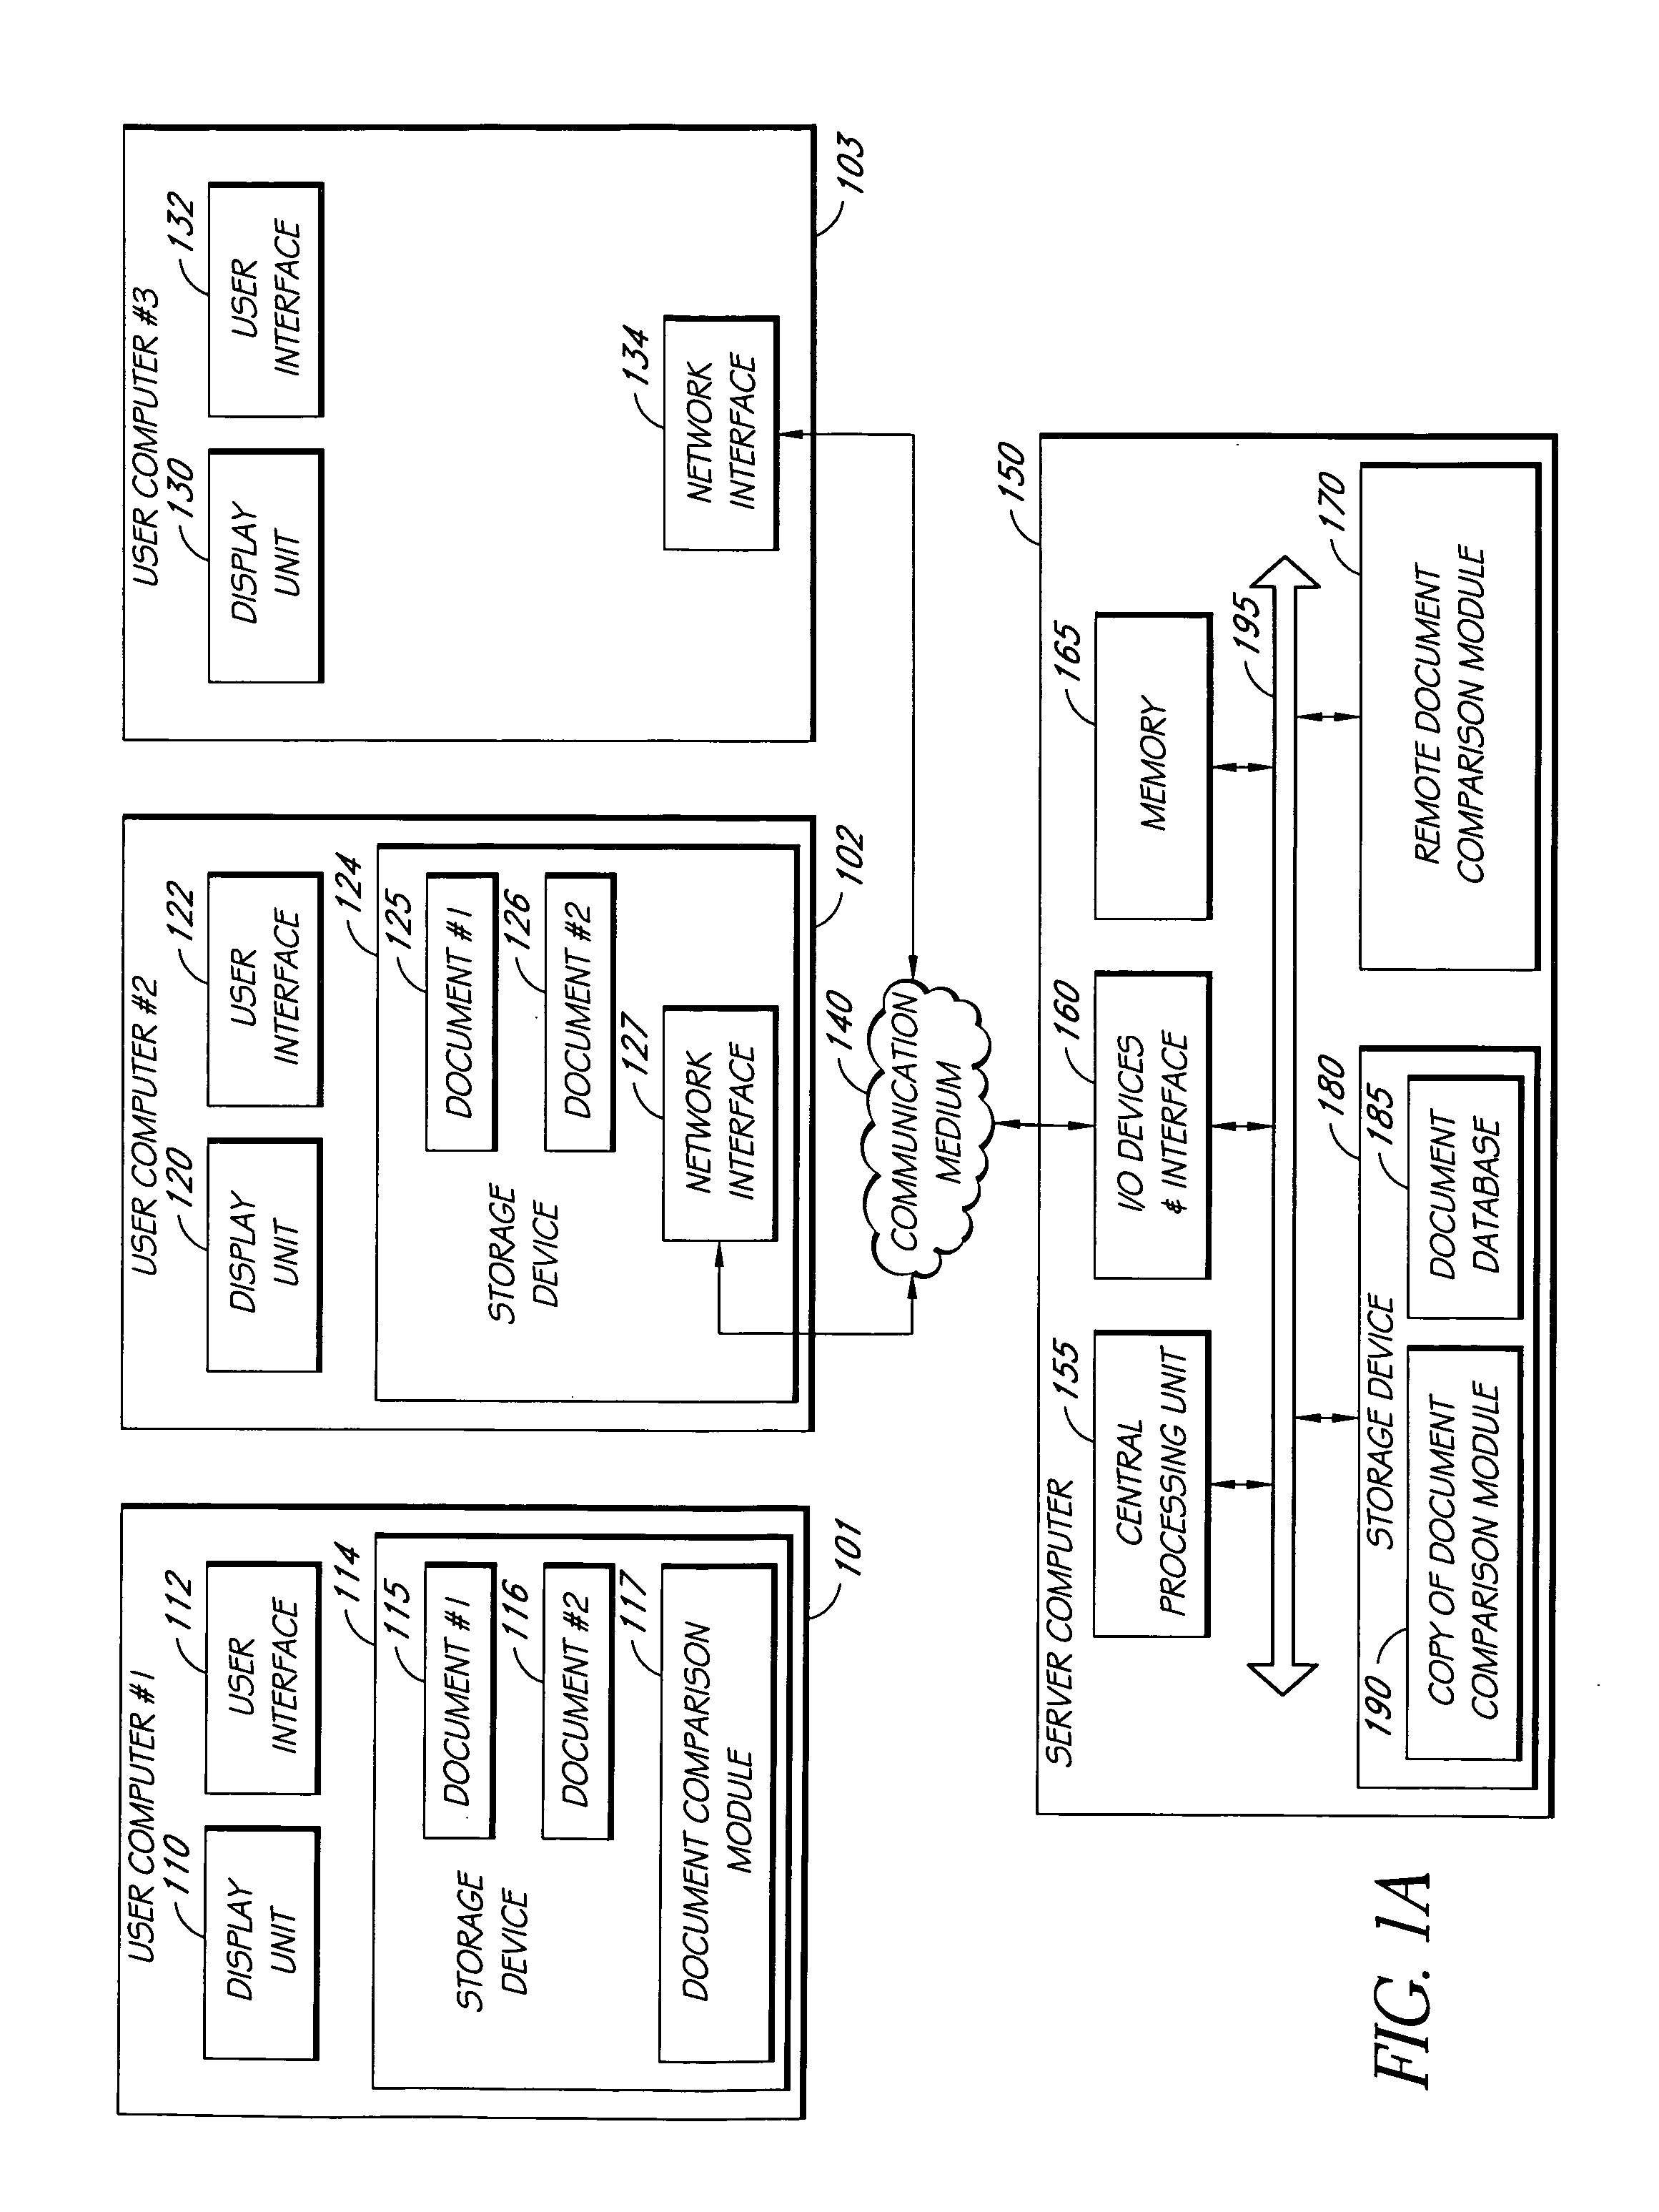 System and method for identifying similar portions in documents